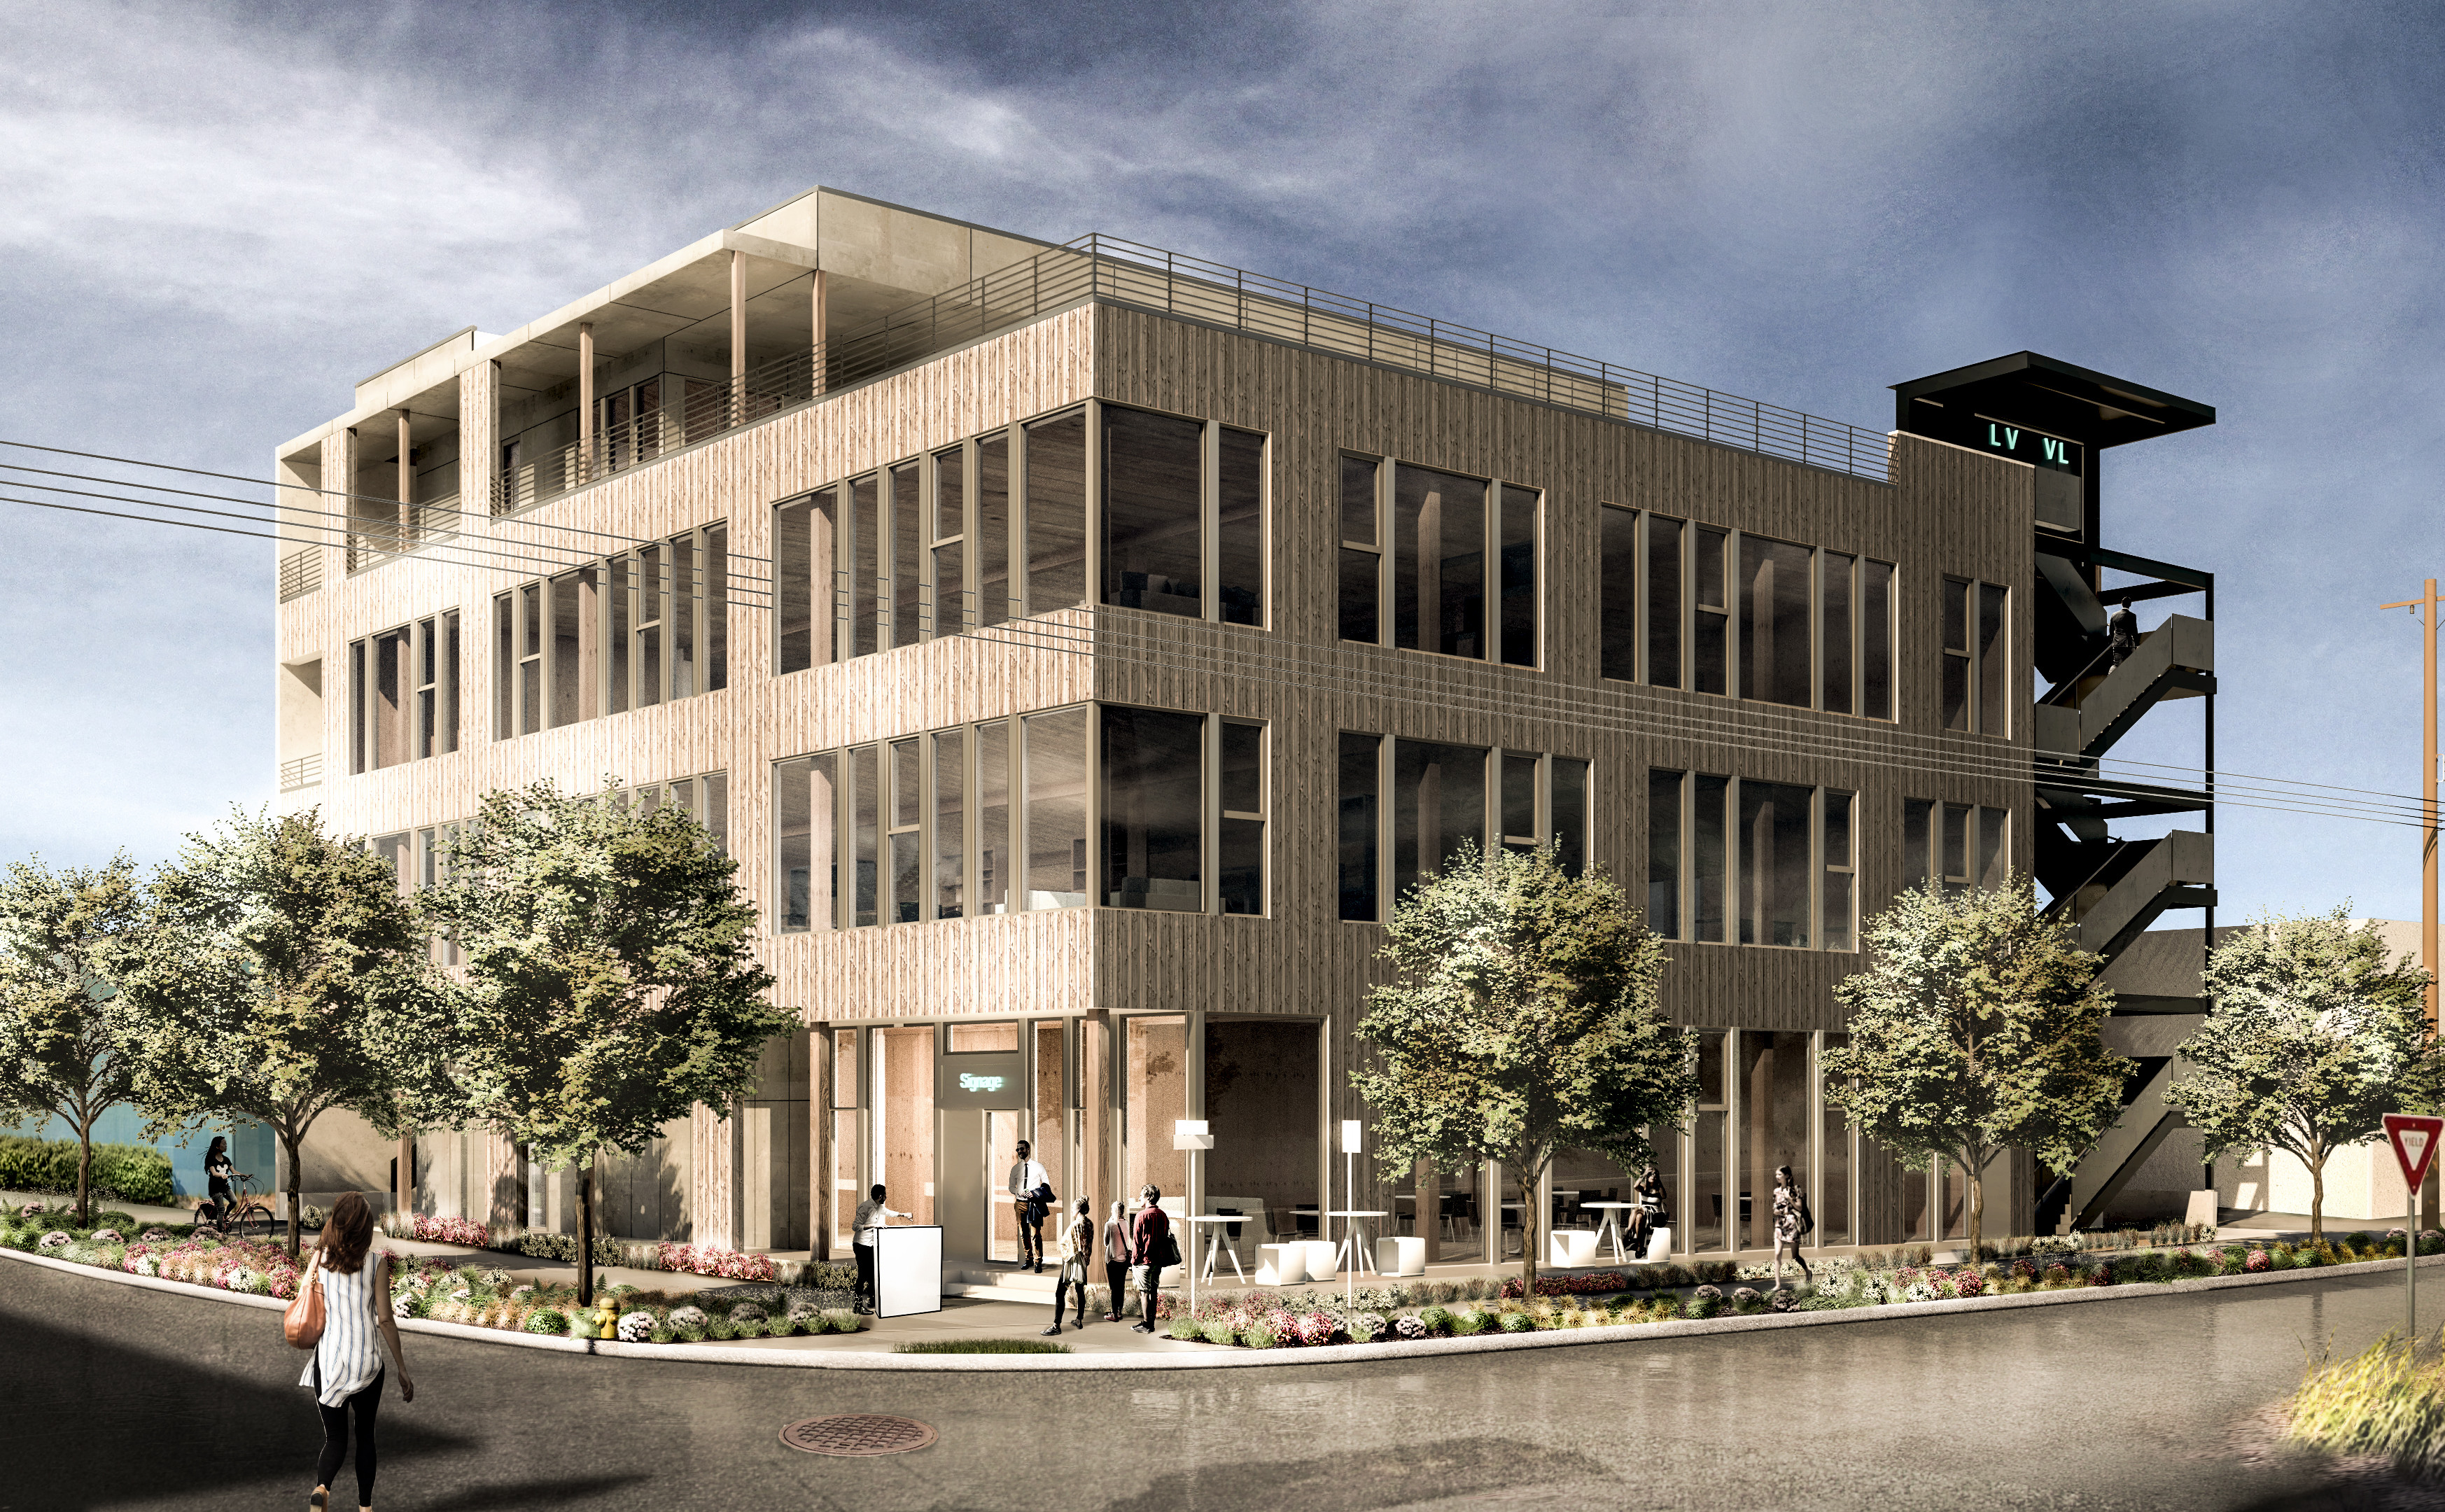 image of the Tømmer Building that will be home to the new Great Notion Brewing - Ballard that will be located at 5101 14th Avenue NW in Seattle, Washington.